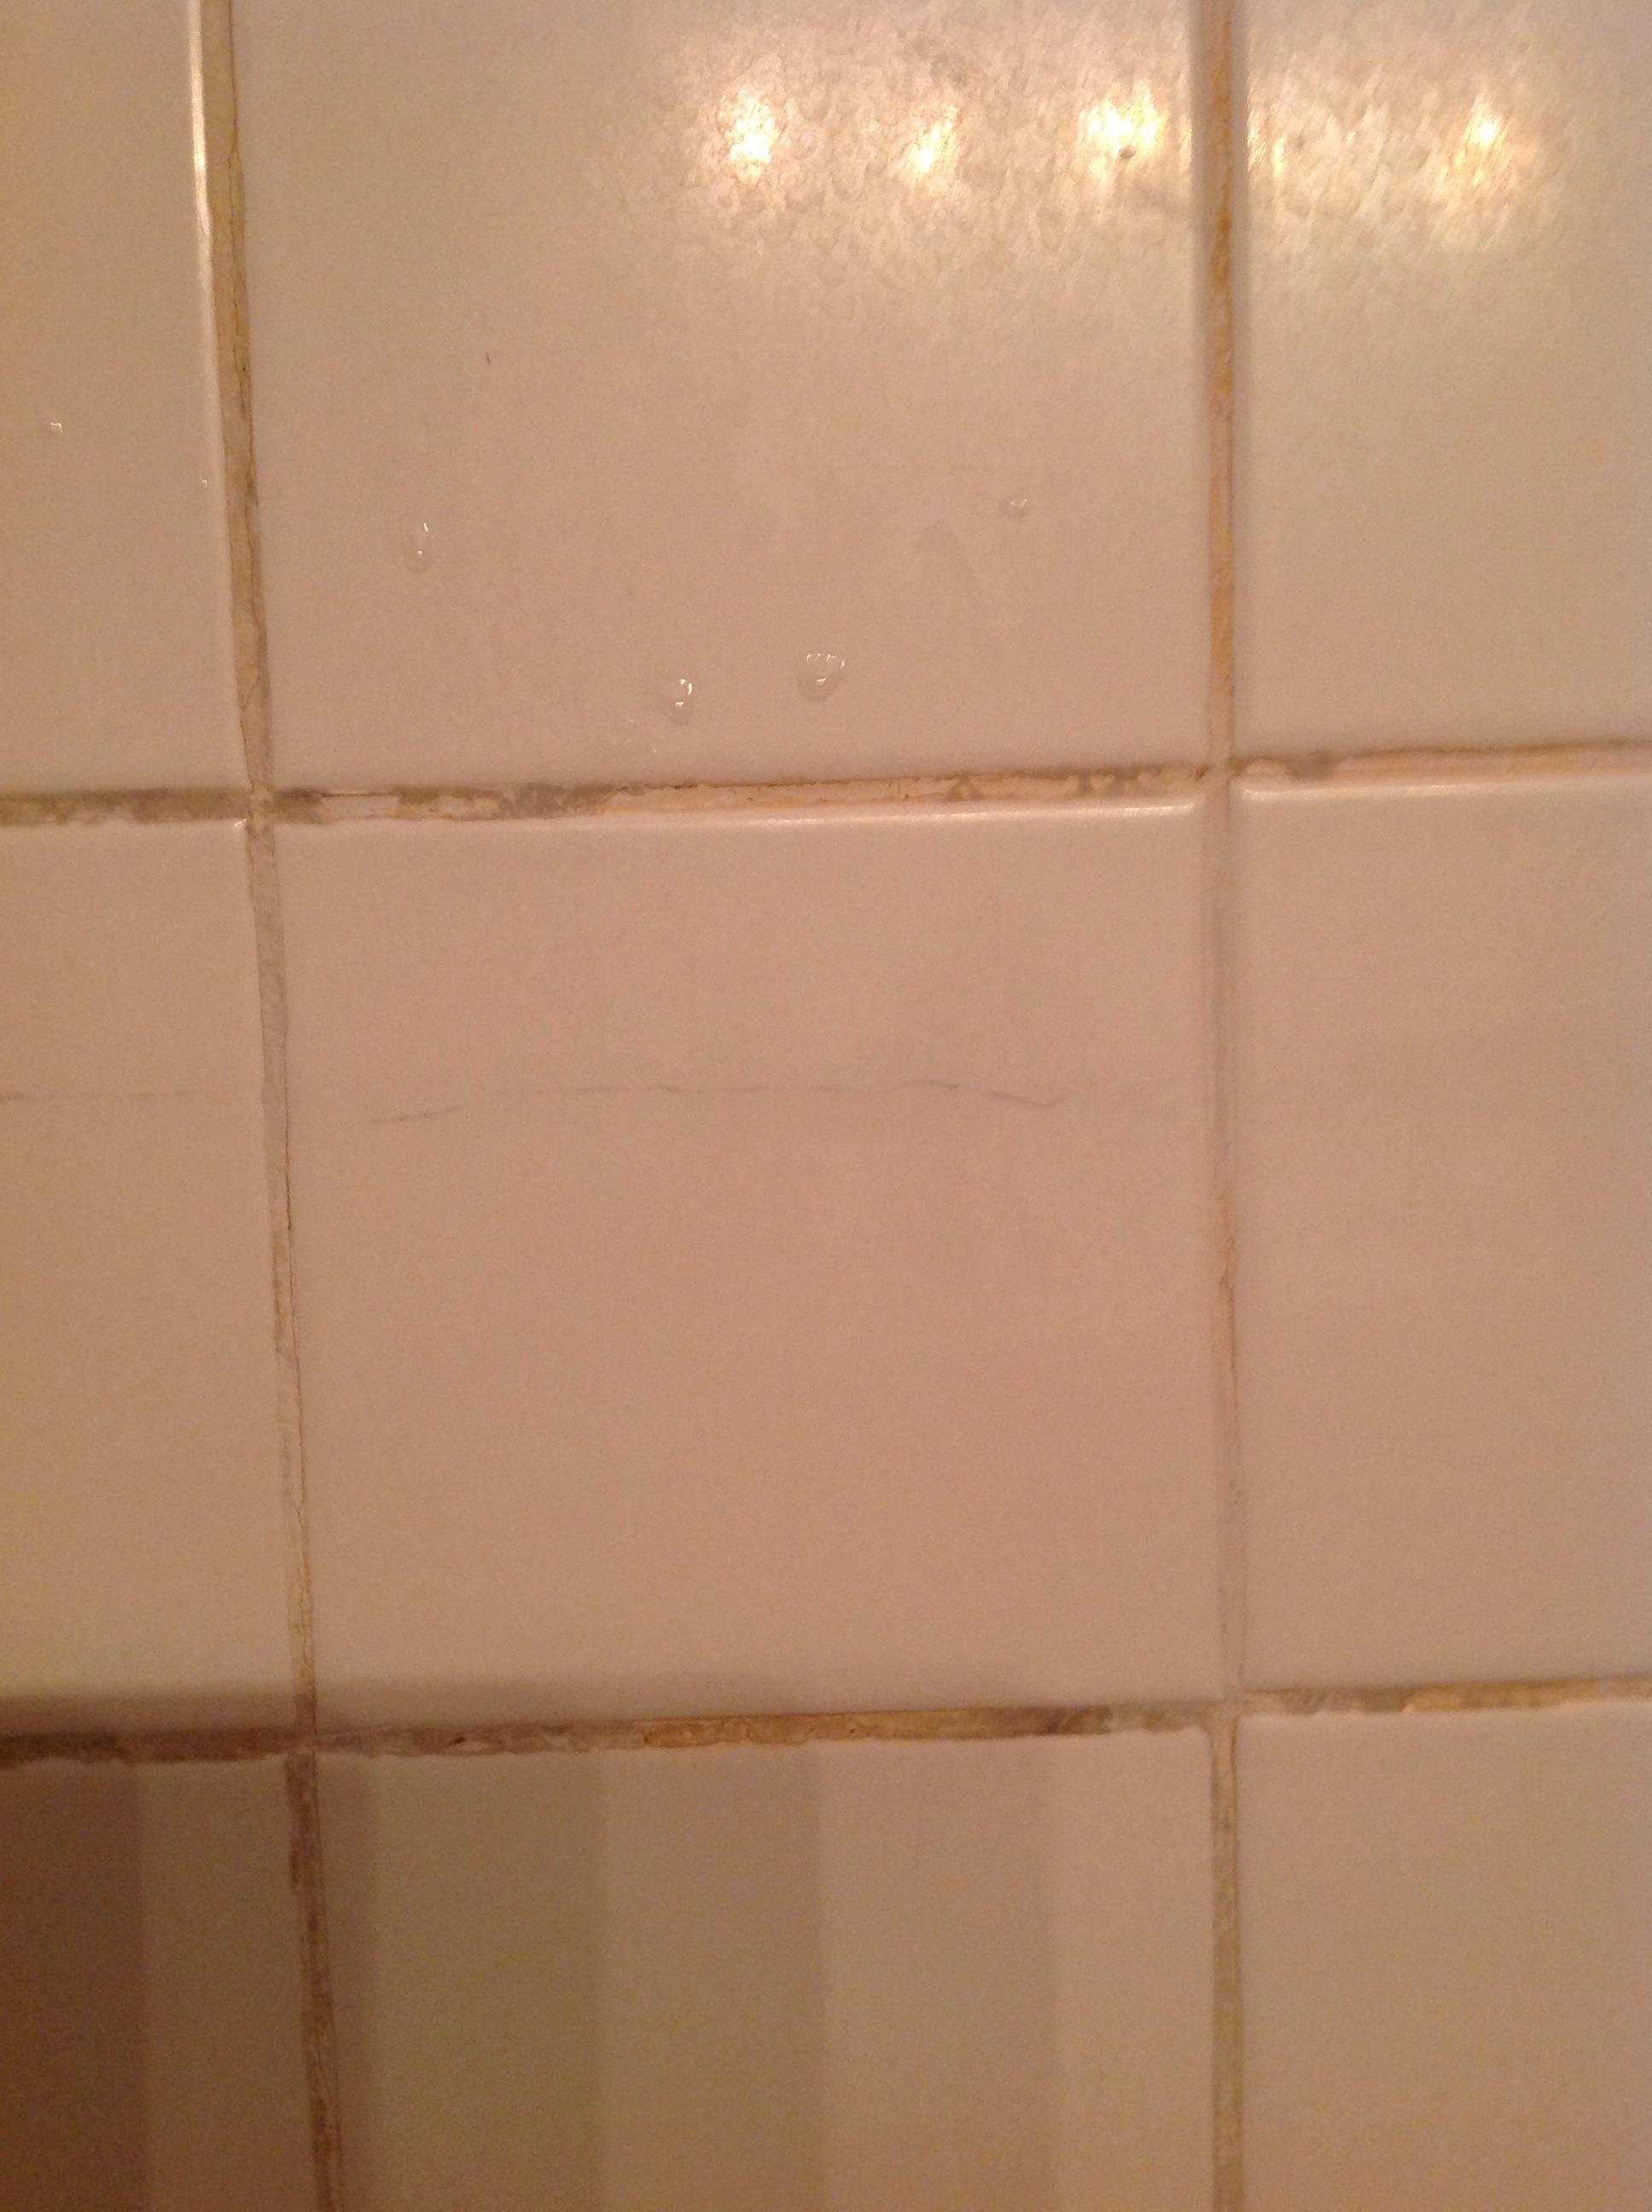 repair - Cracked bathroom tile - runs almost entire length of the ...